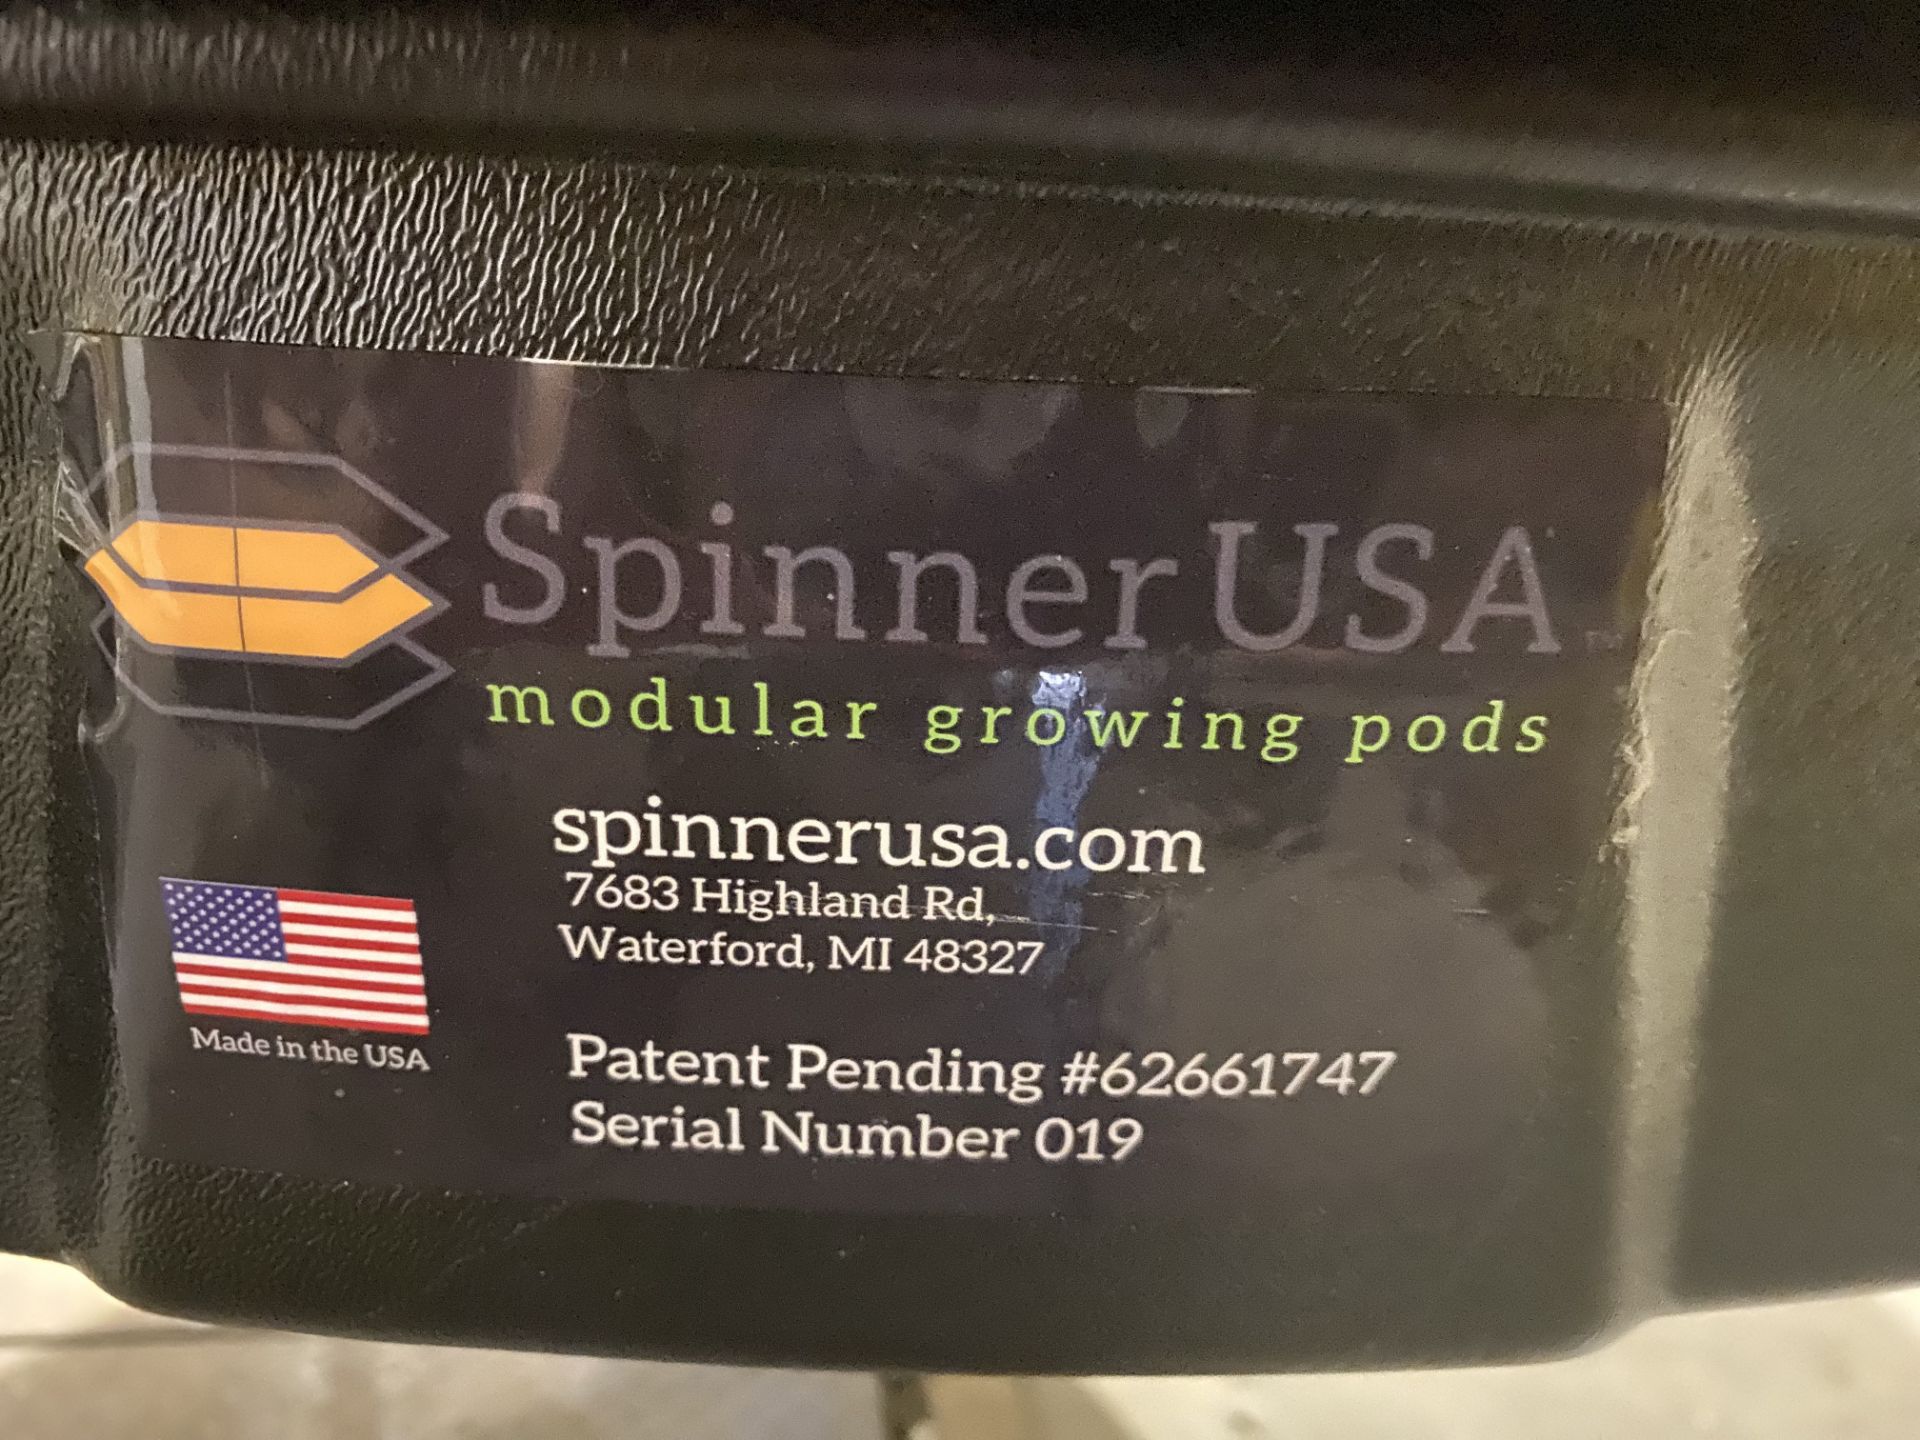 Used Spinner USA Modular Growing Pods XP. Model Double Stack Unit. (SKU 20012) - Image 3 of 3